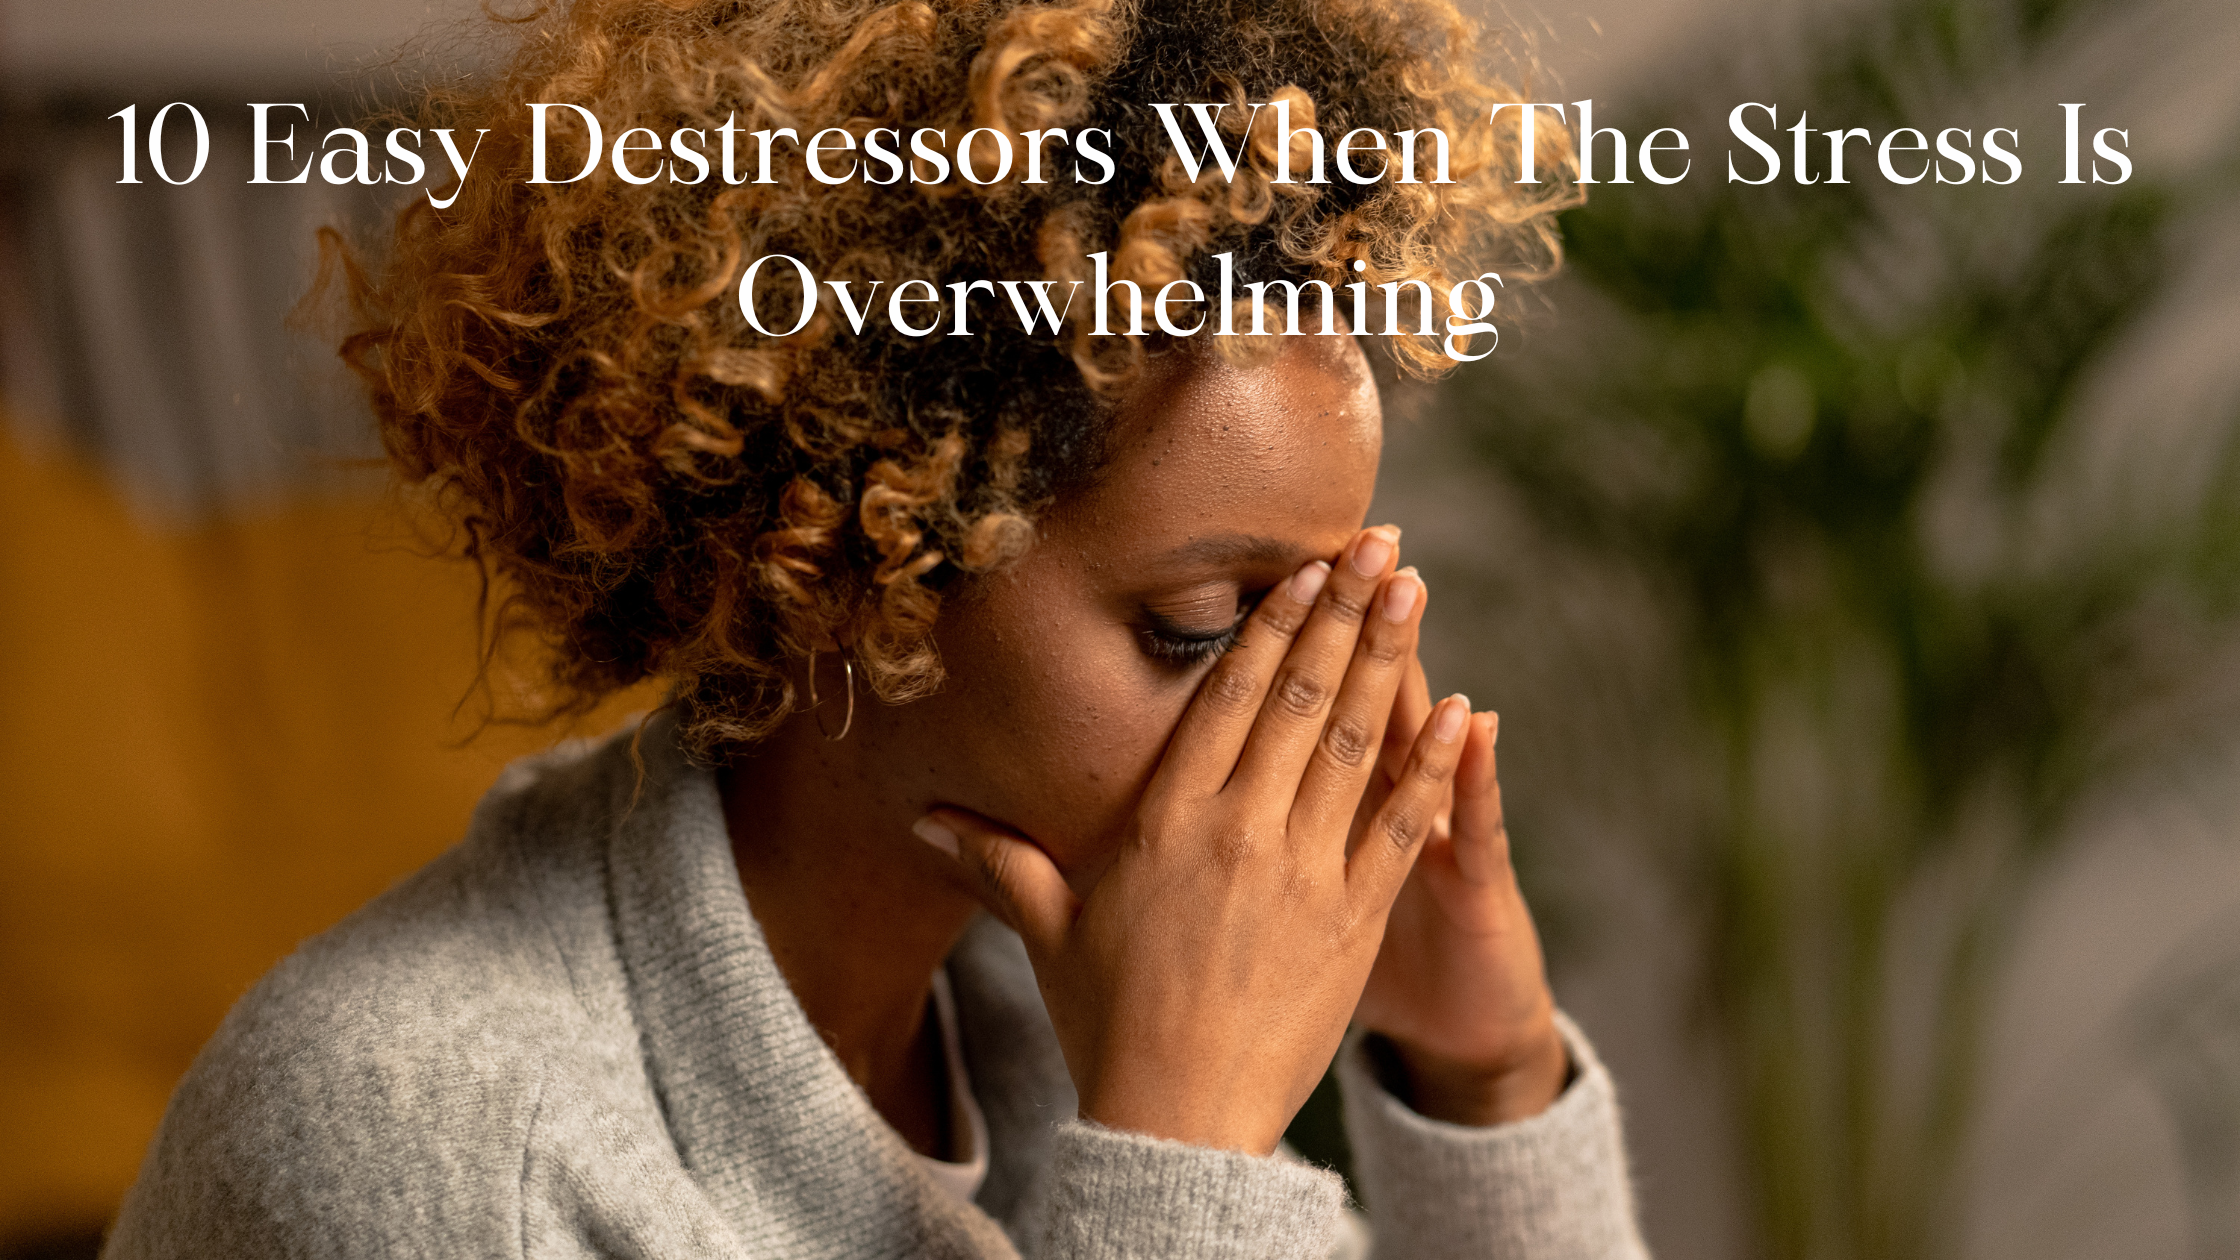 10 Easy Destressors When The Stress Is Overwhelming